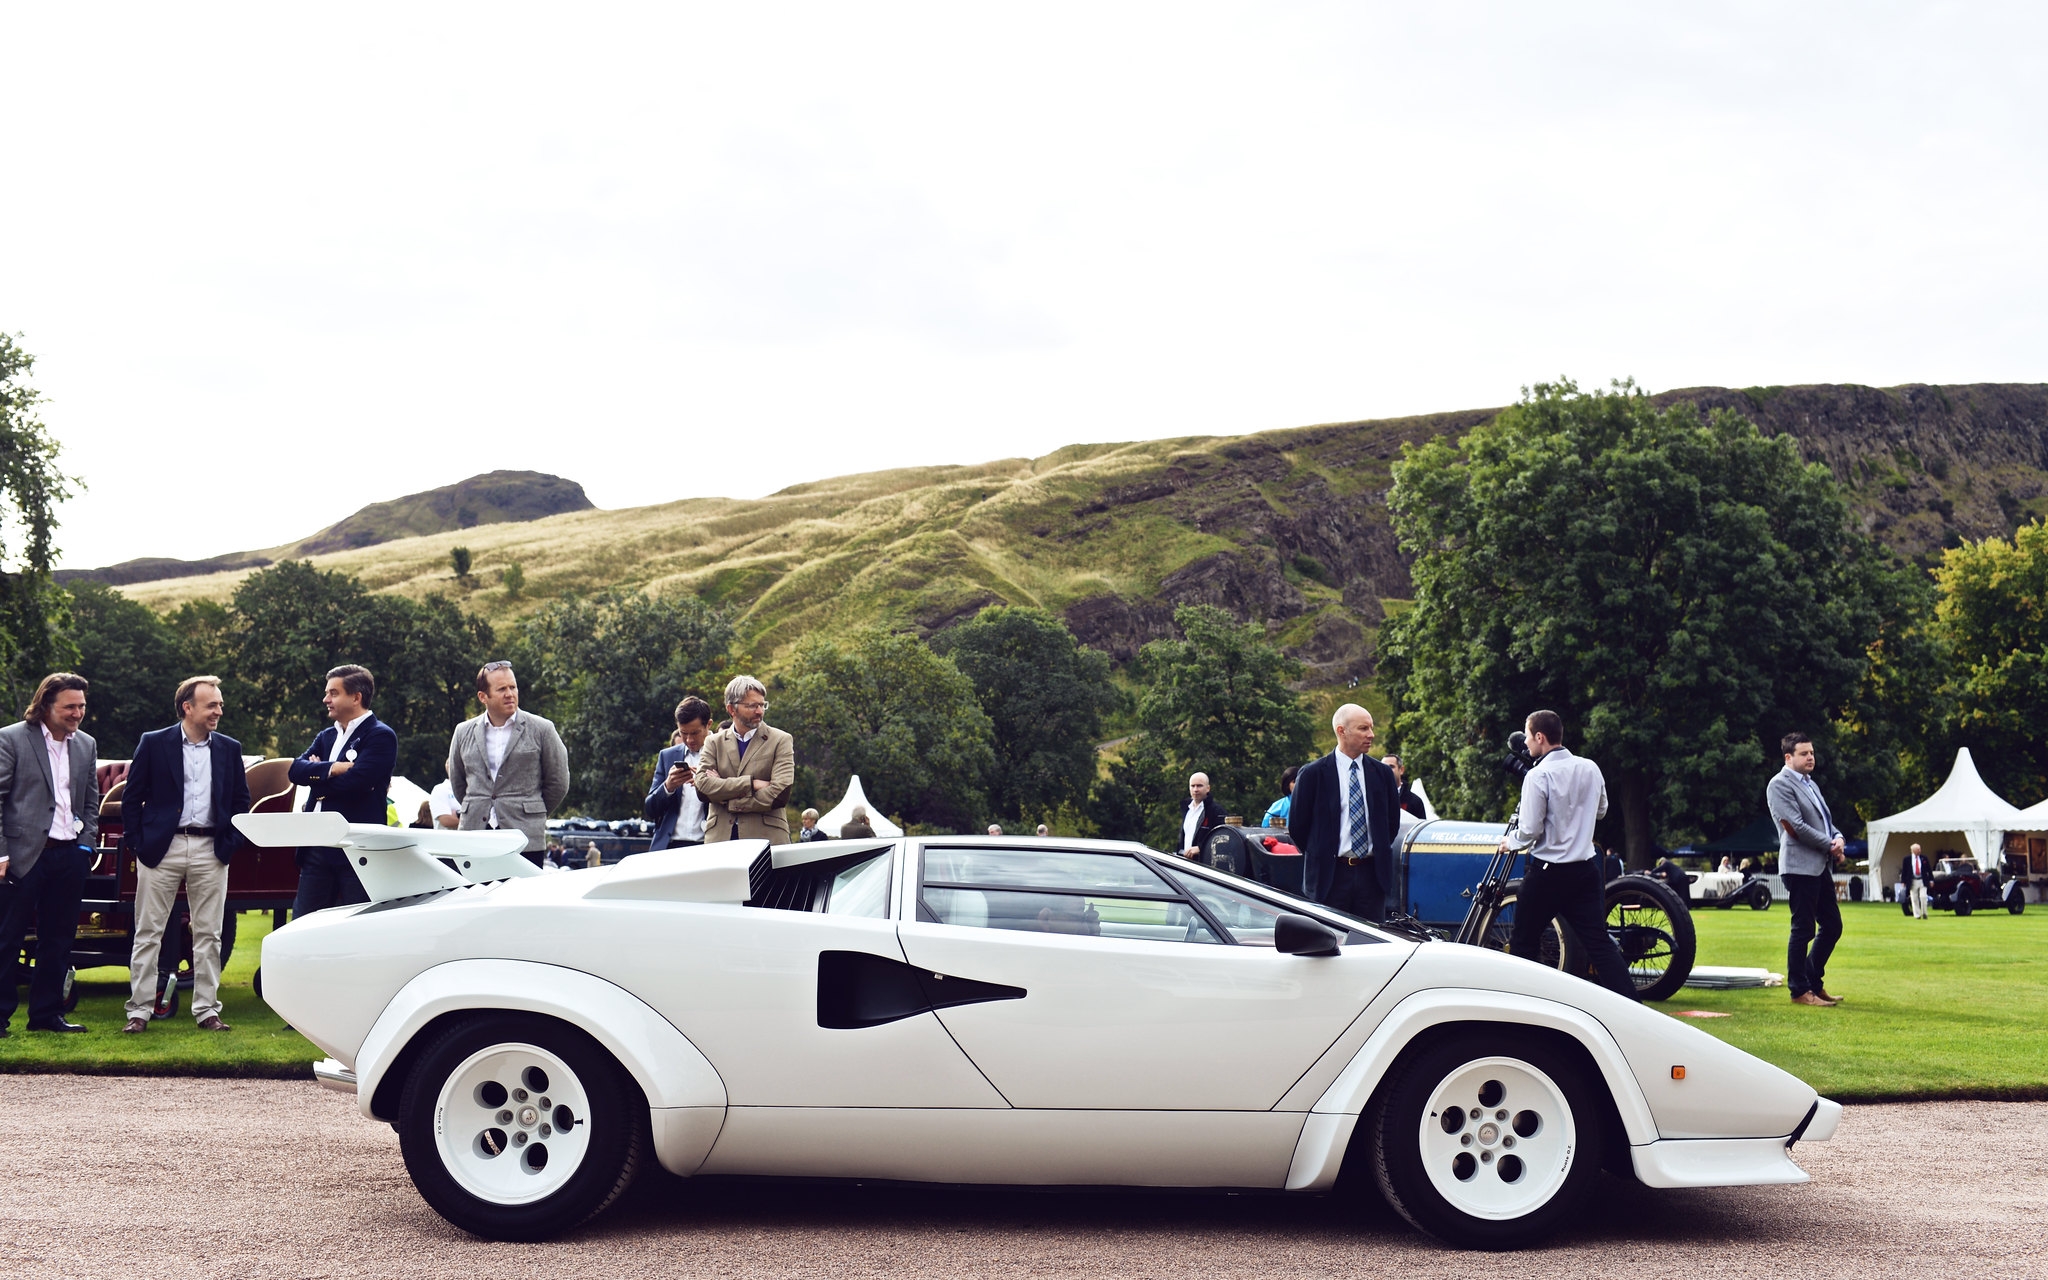 The Best Of Lamborghini At London Concours 2020